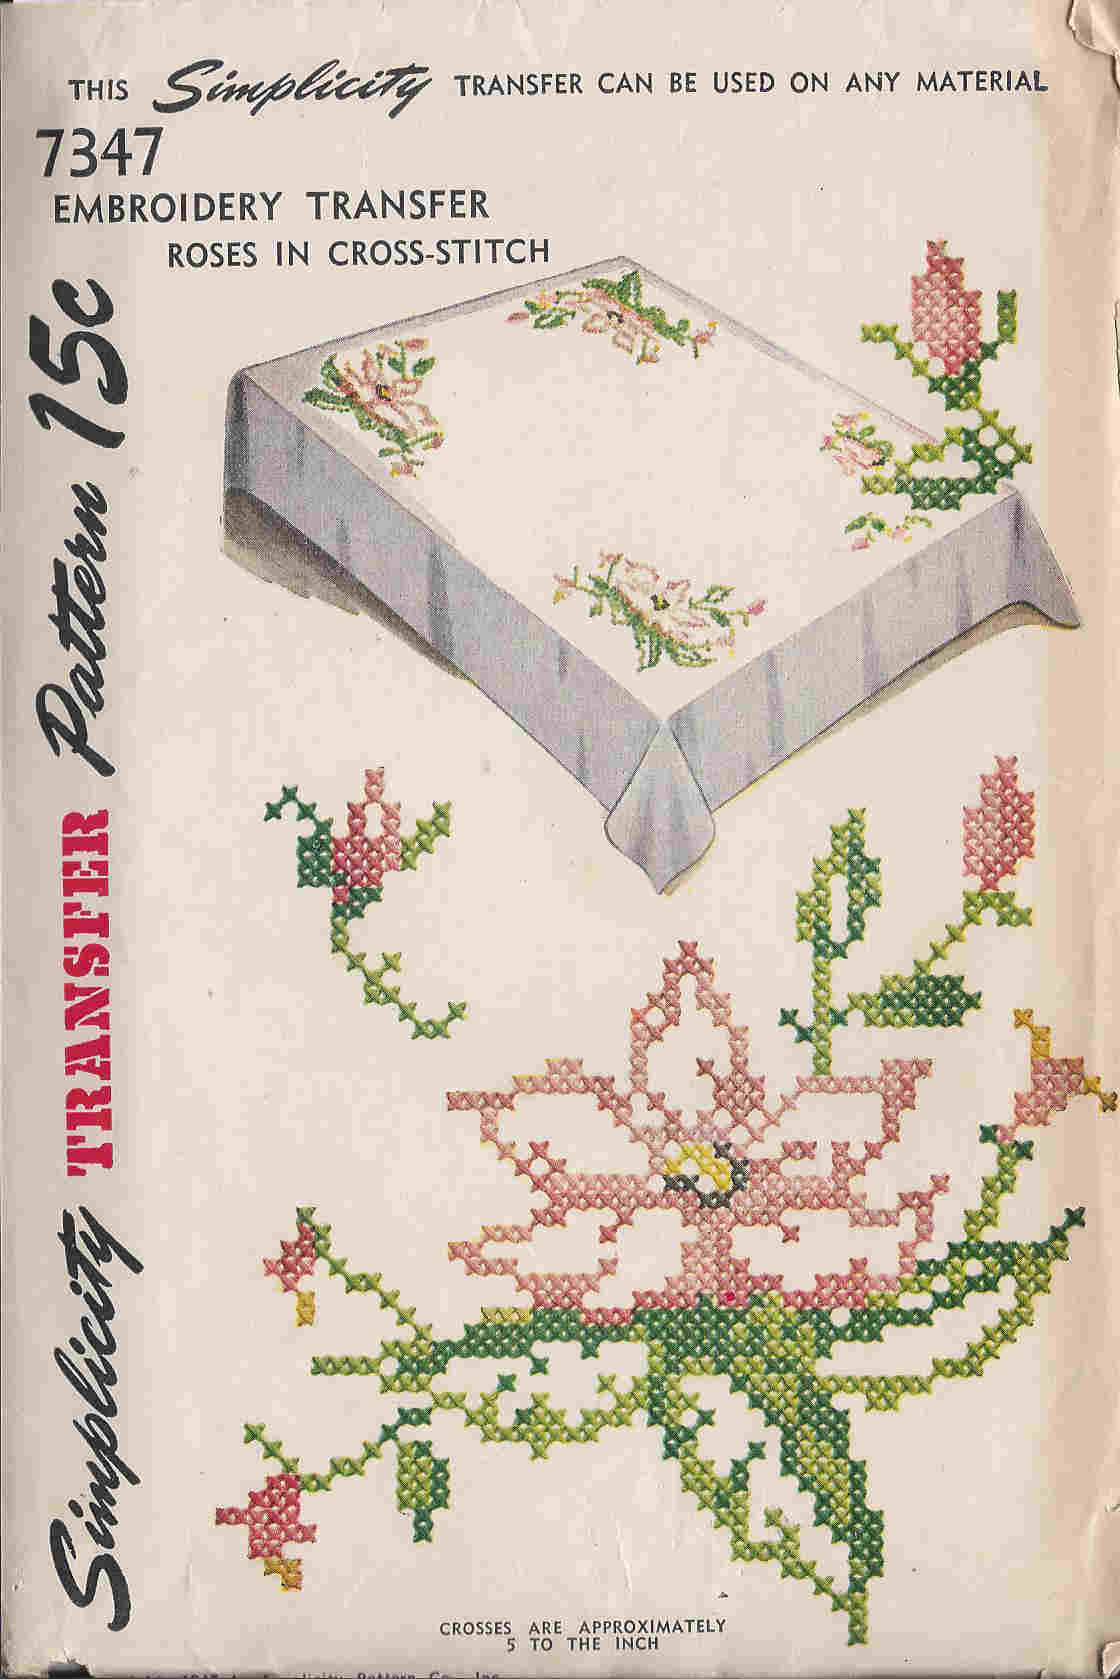 Hand Embroidery Transfer Patterns Dellajane Sewing Patterns Aunt Martha Transfer And Embroidery Patterns